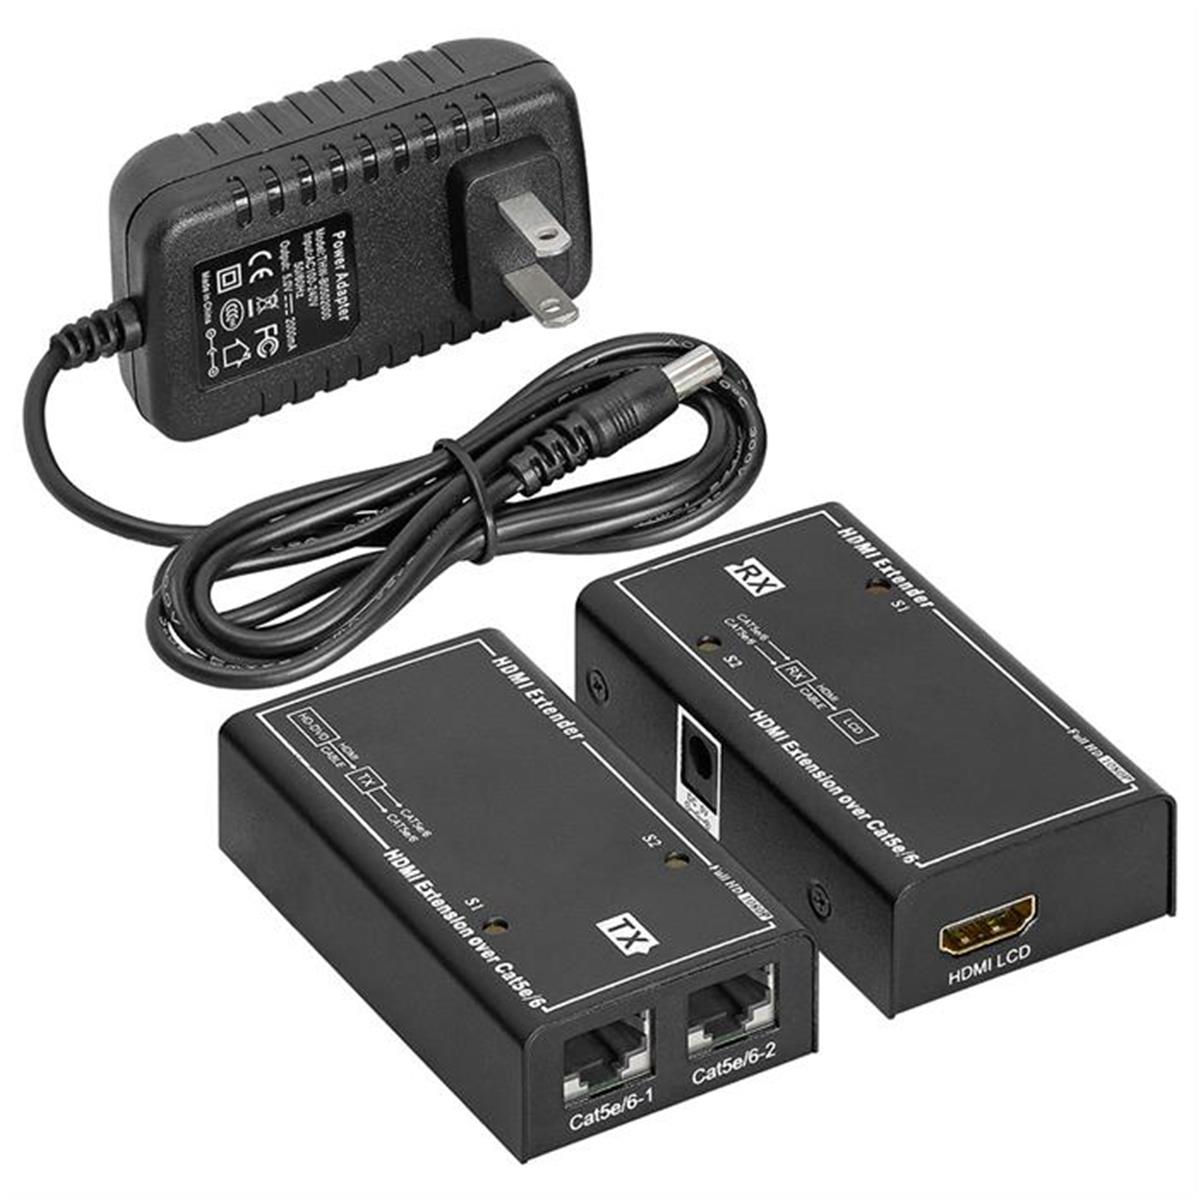 248-n Hdmi Balun Extender Repeater Over Cat5e, Cat6 - Up To 196 Ft.